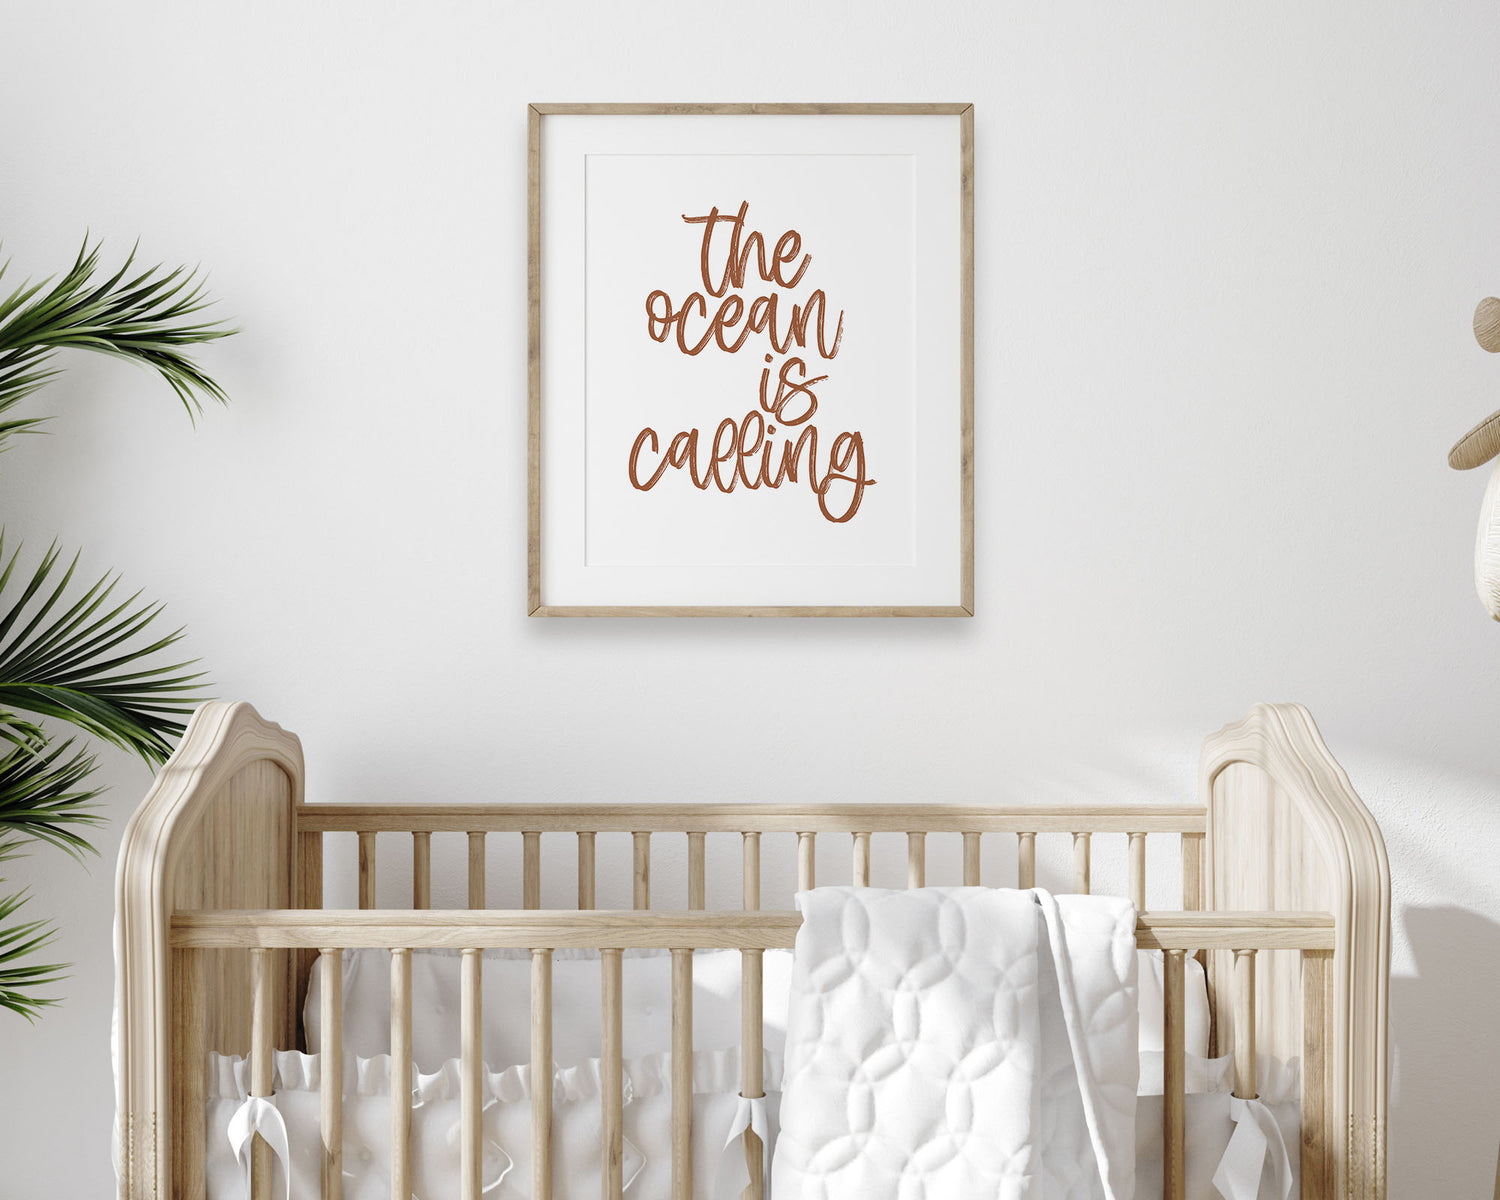 Rust Clay Terracotta earth tone colored The Ocean Is Calling Printable Wall Art featuring a textured brush style cursive lettered quote perfect for Baby Boy Nautical Nursery Decor, Baby Girl Surf Nursery Wall Art, Nautical Kids Bedroom Decor or Children's Coastal Wall Art.